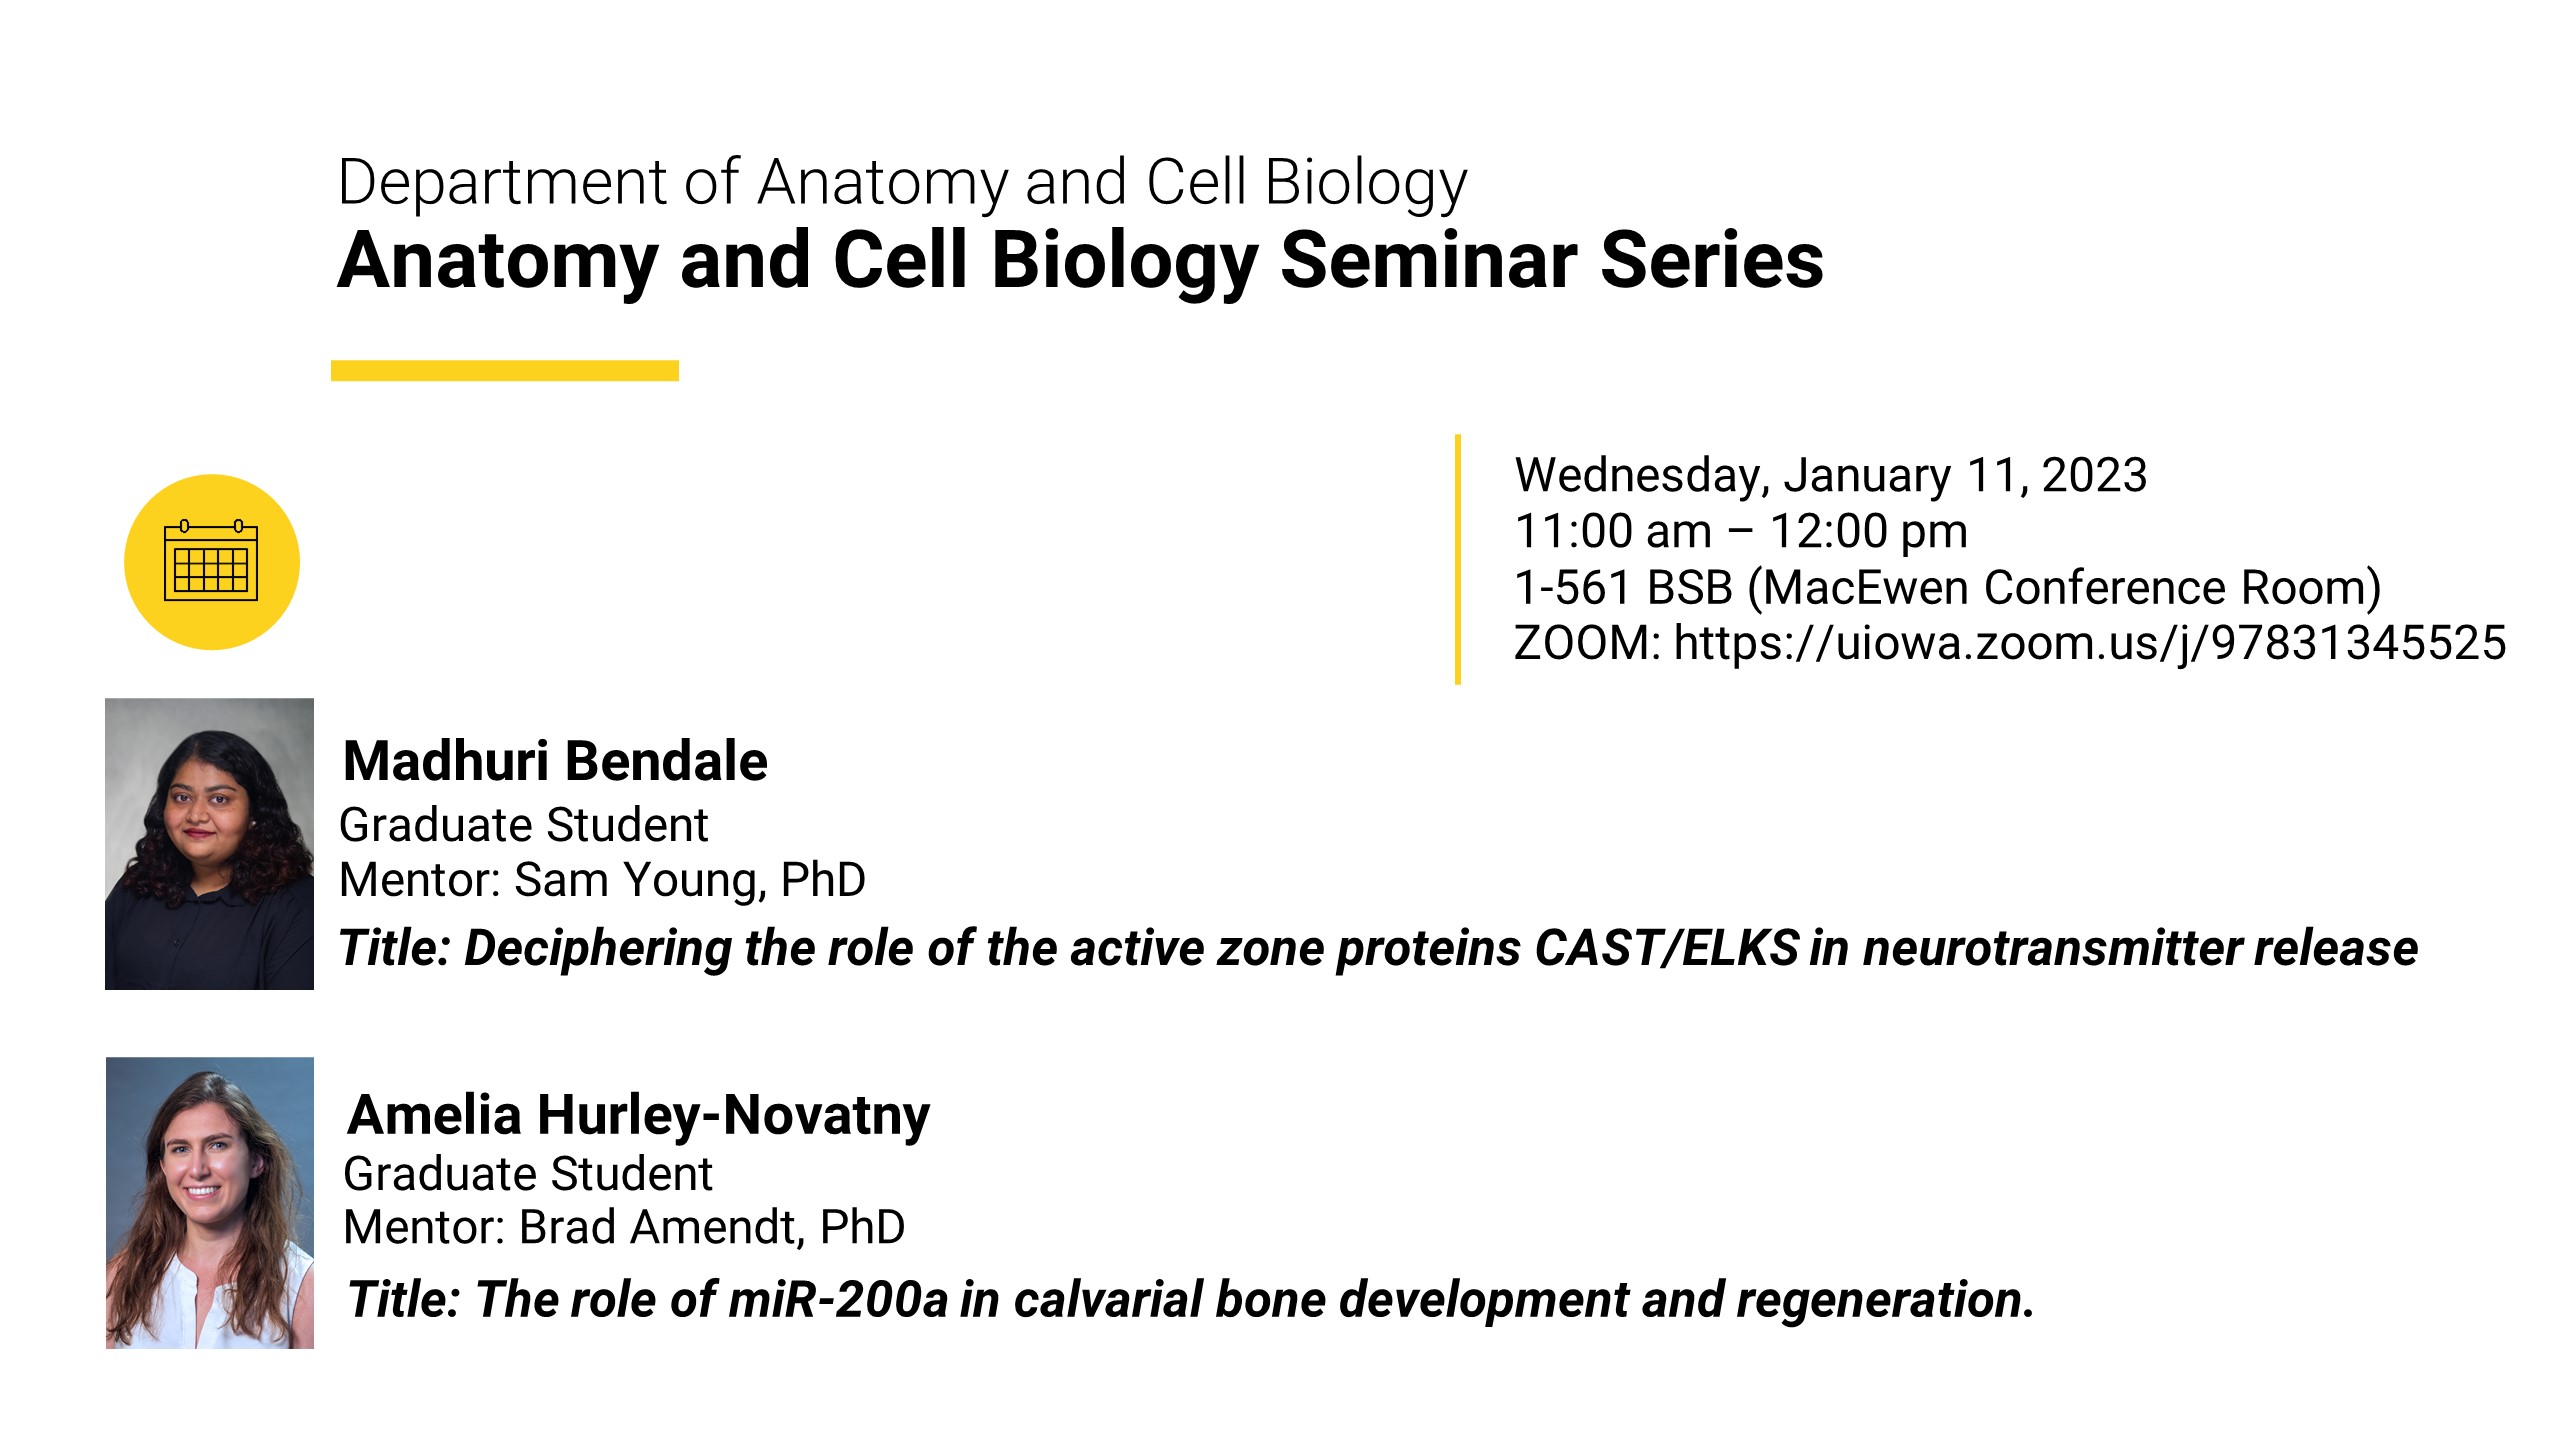 Anatomy and Cell Biology Departmental Seminar promotional image